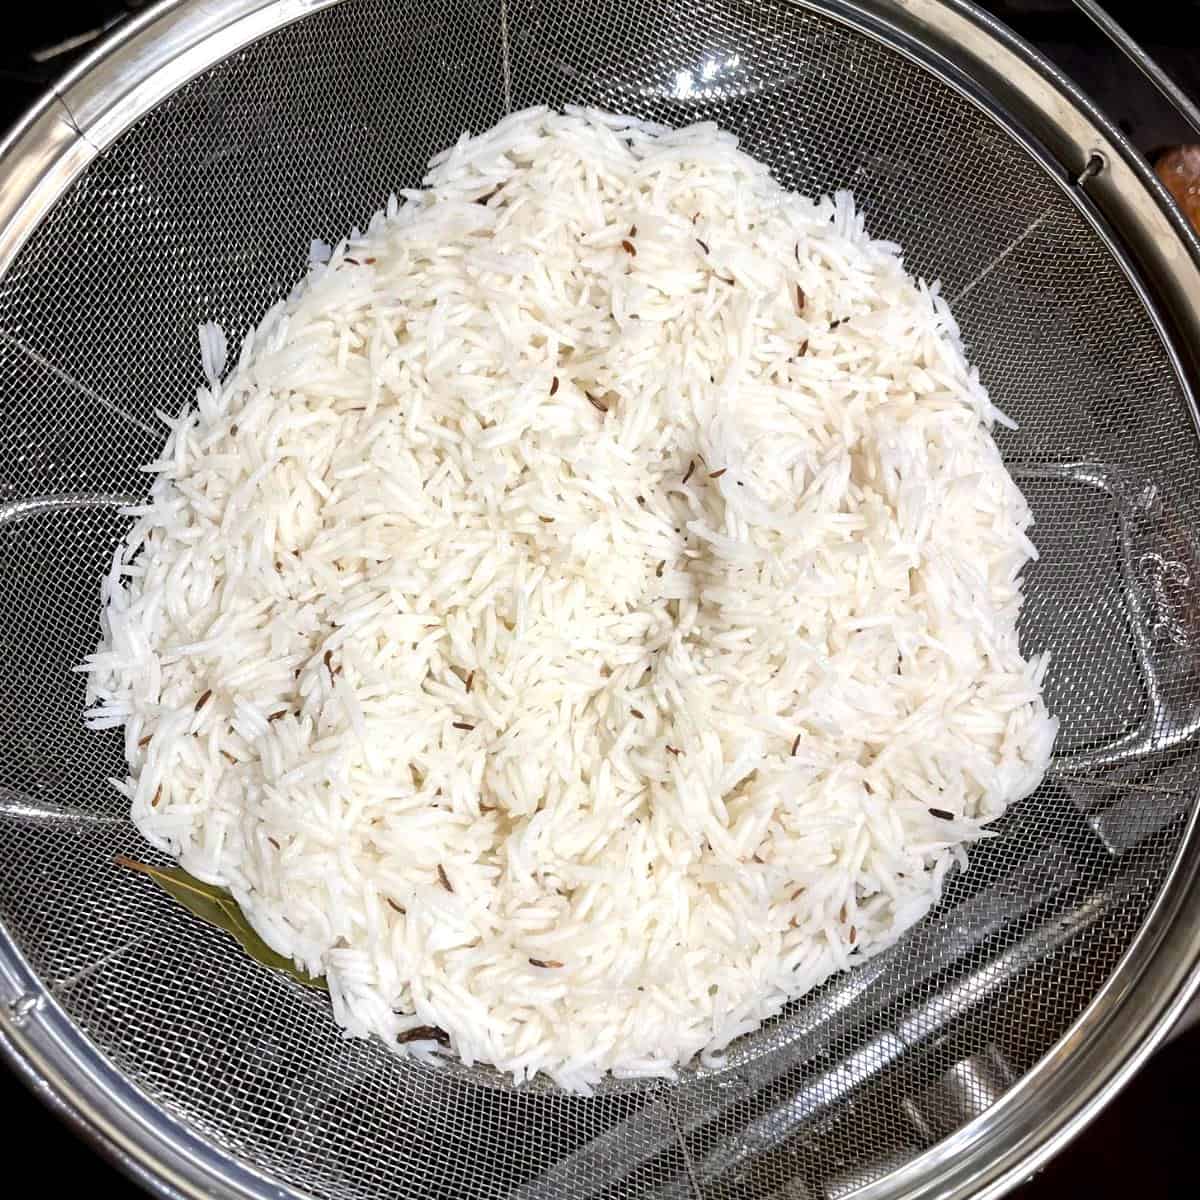 Cooked basmati rice washed and drained in colander.